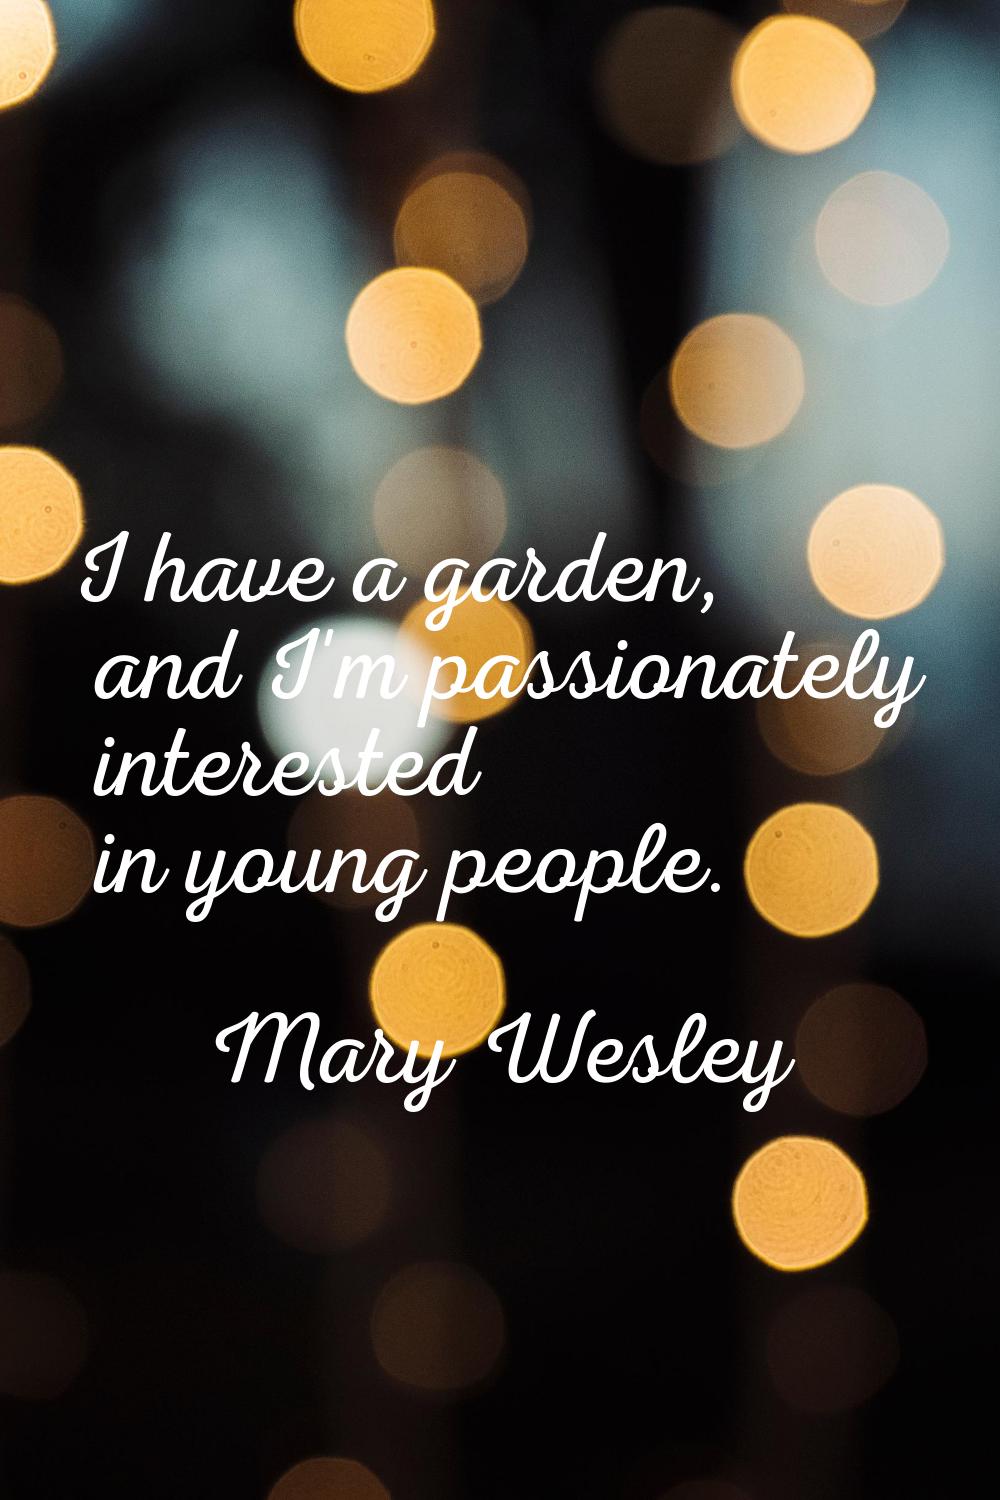 I have a garden, and I'm passionately interested in young people.